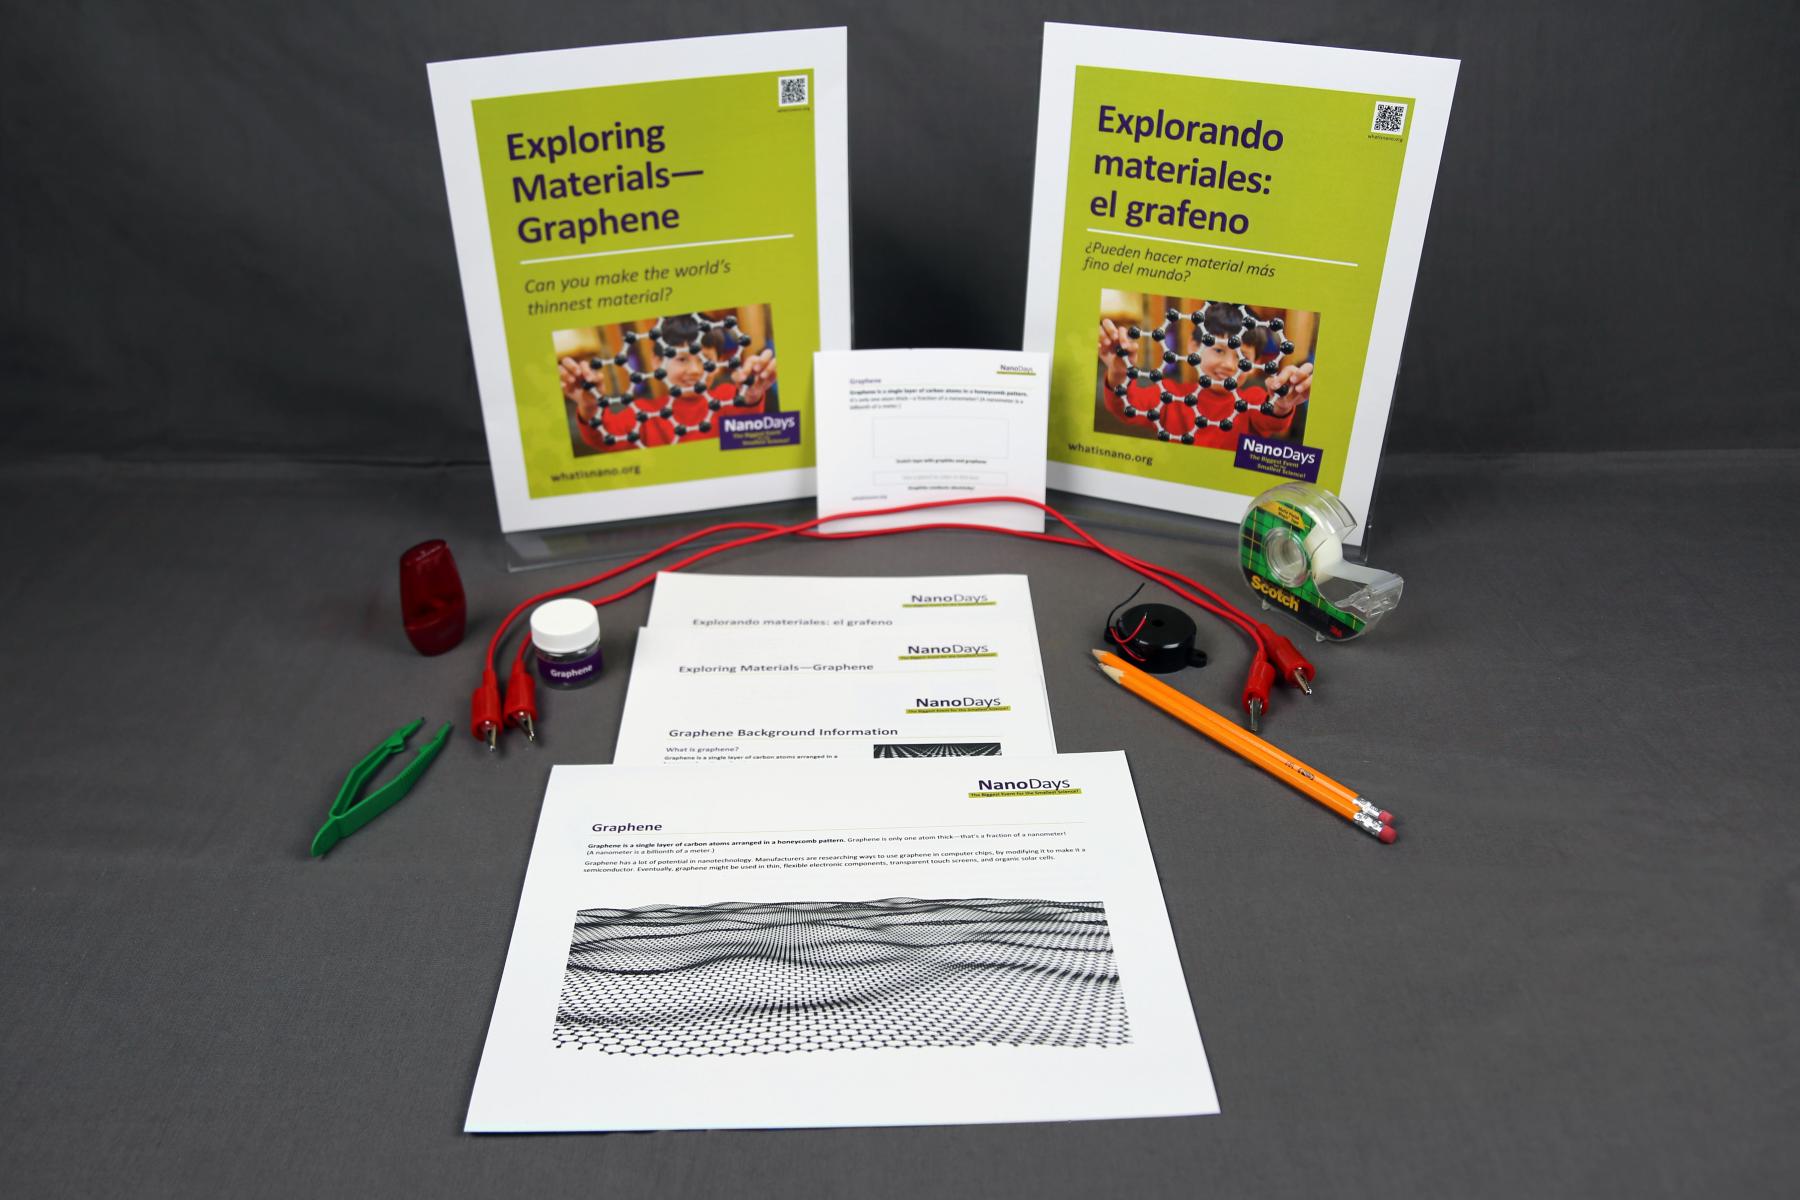 Exploring Materials - Graphene signs, activity materials, and guides.